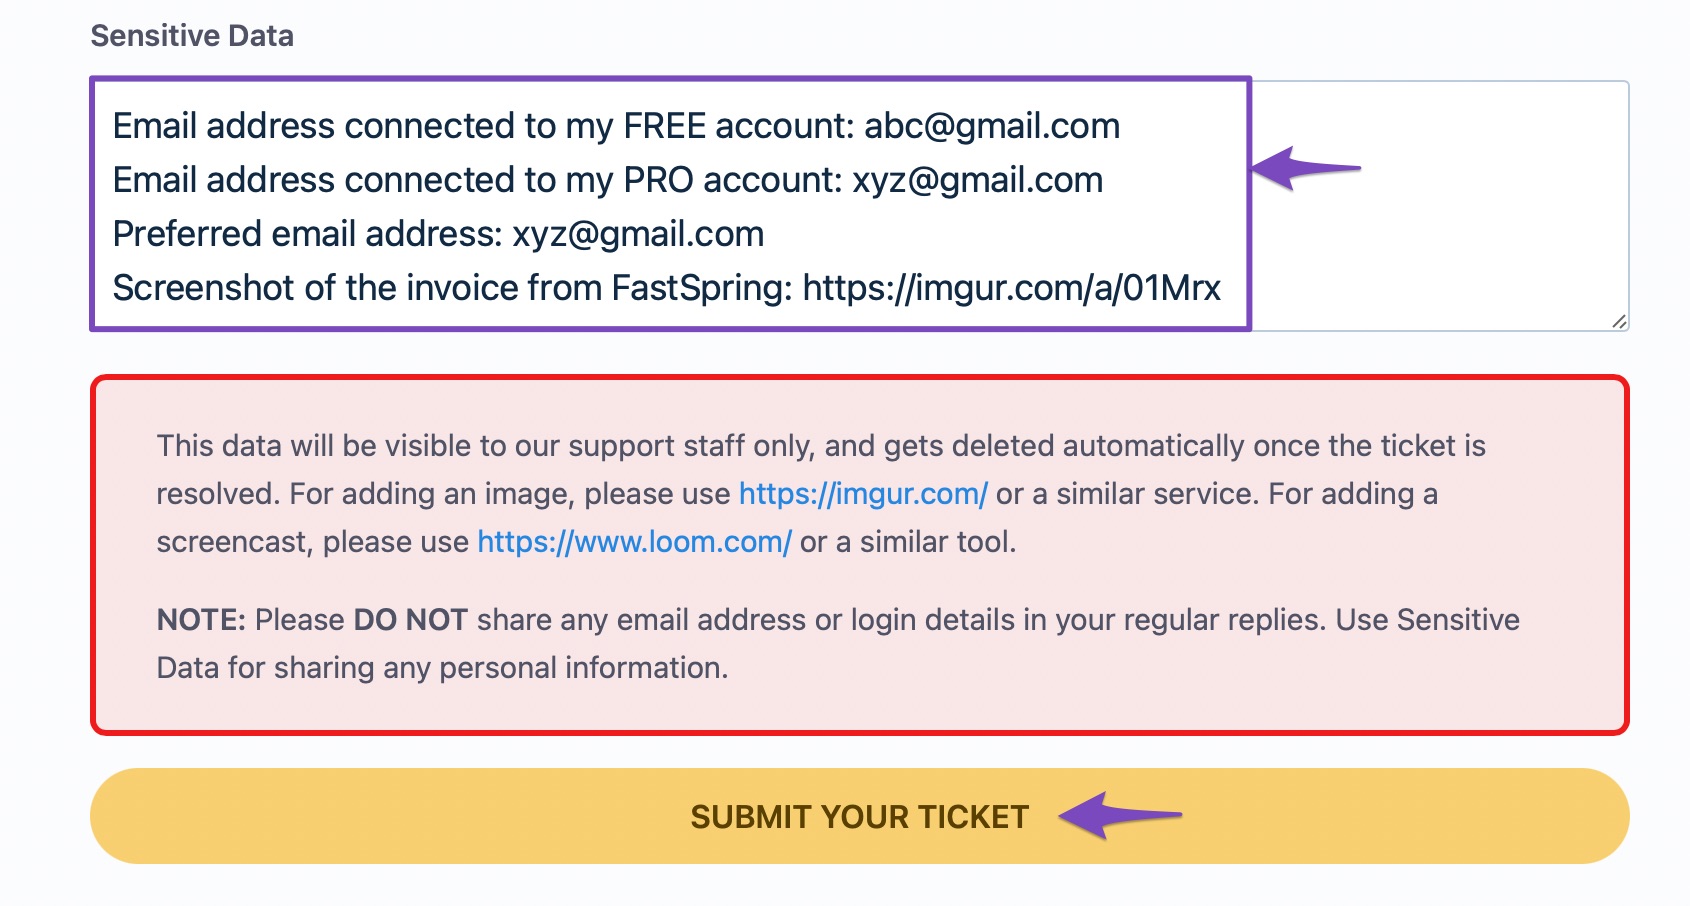 Enter sensitive data and submit the ticket